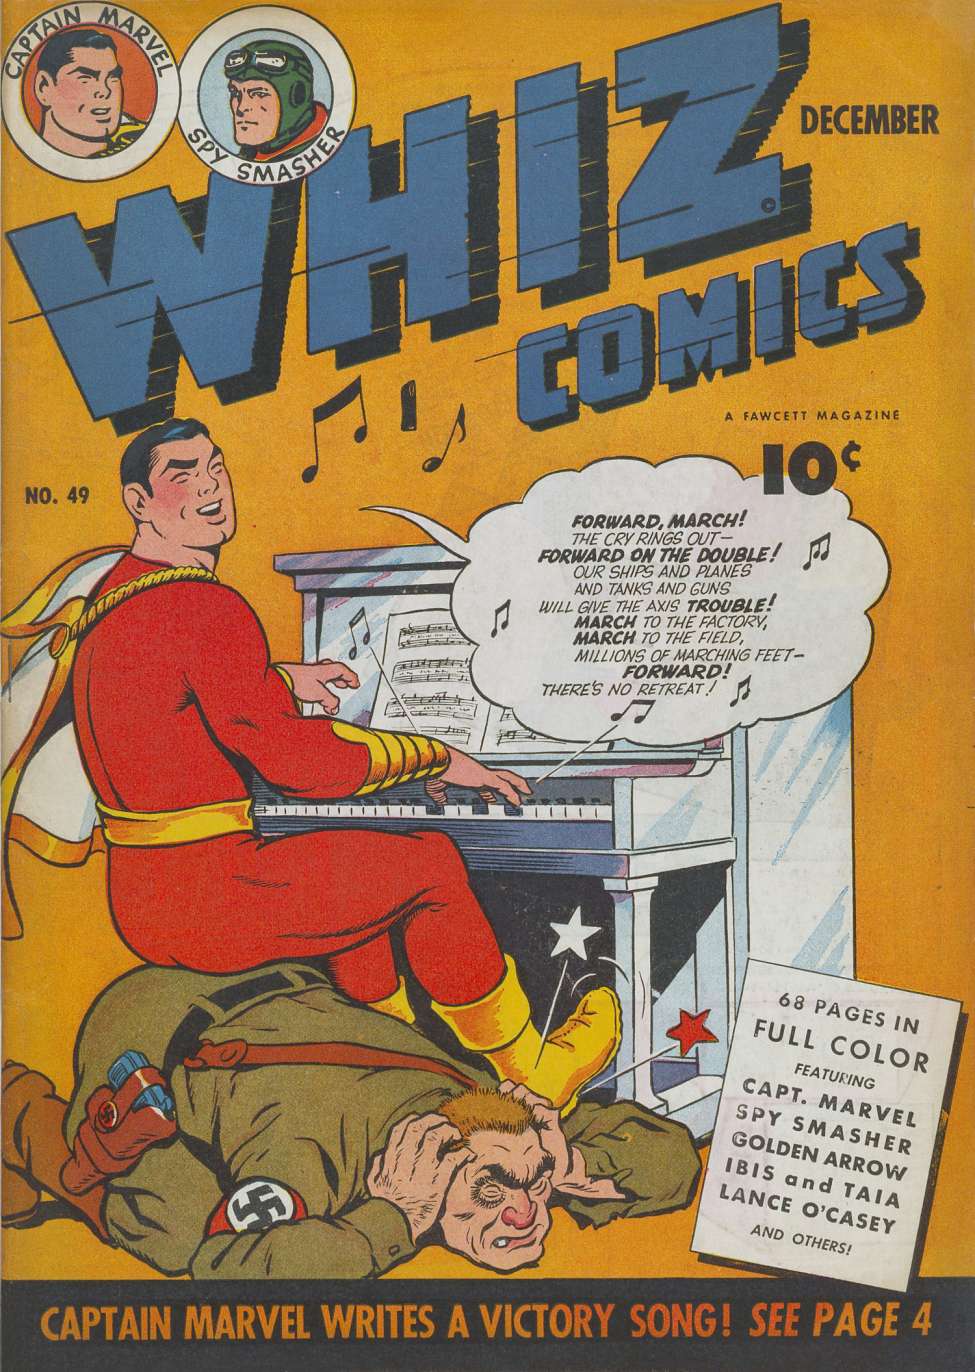 Book Cover For Whiz Comics 49